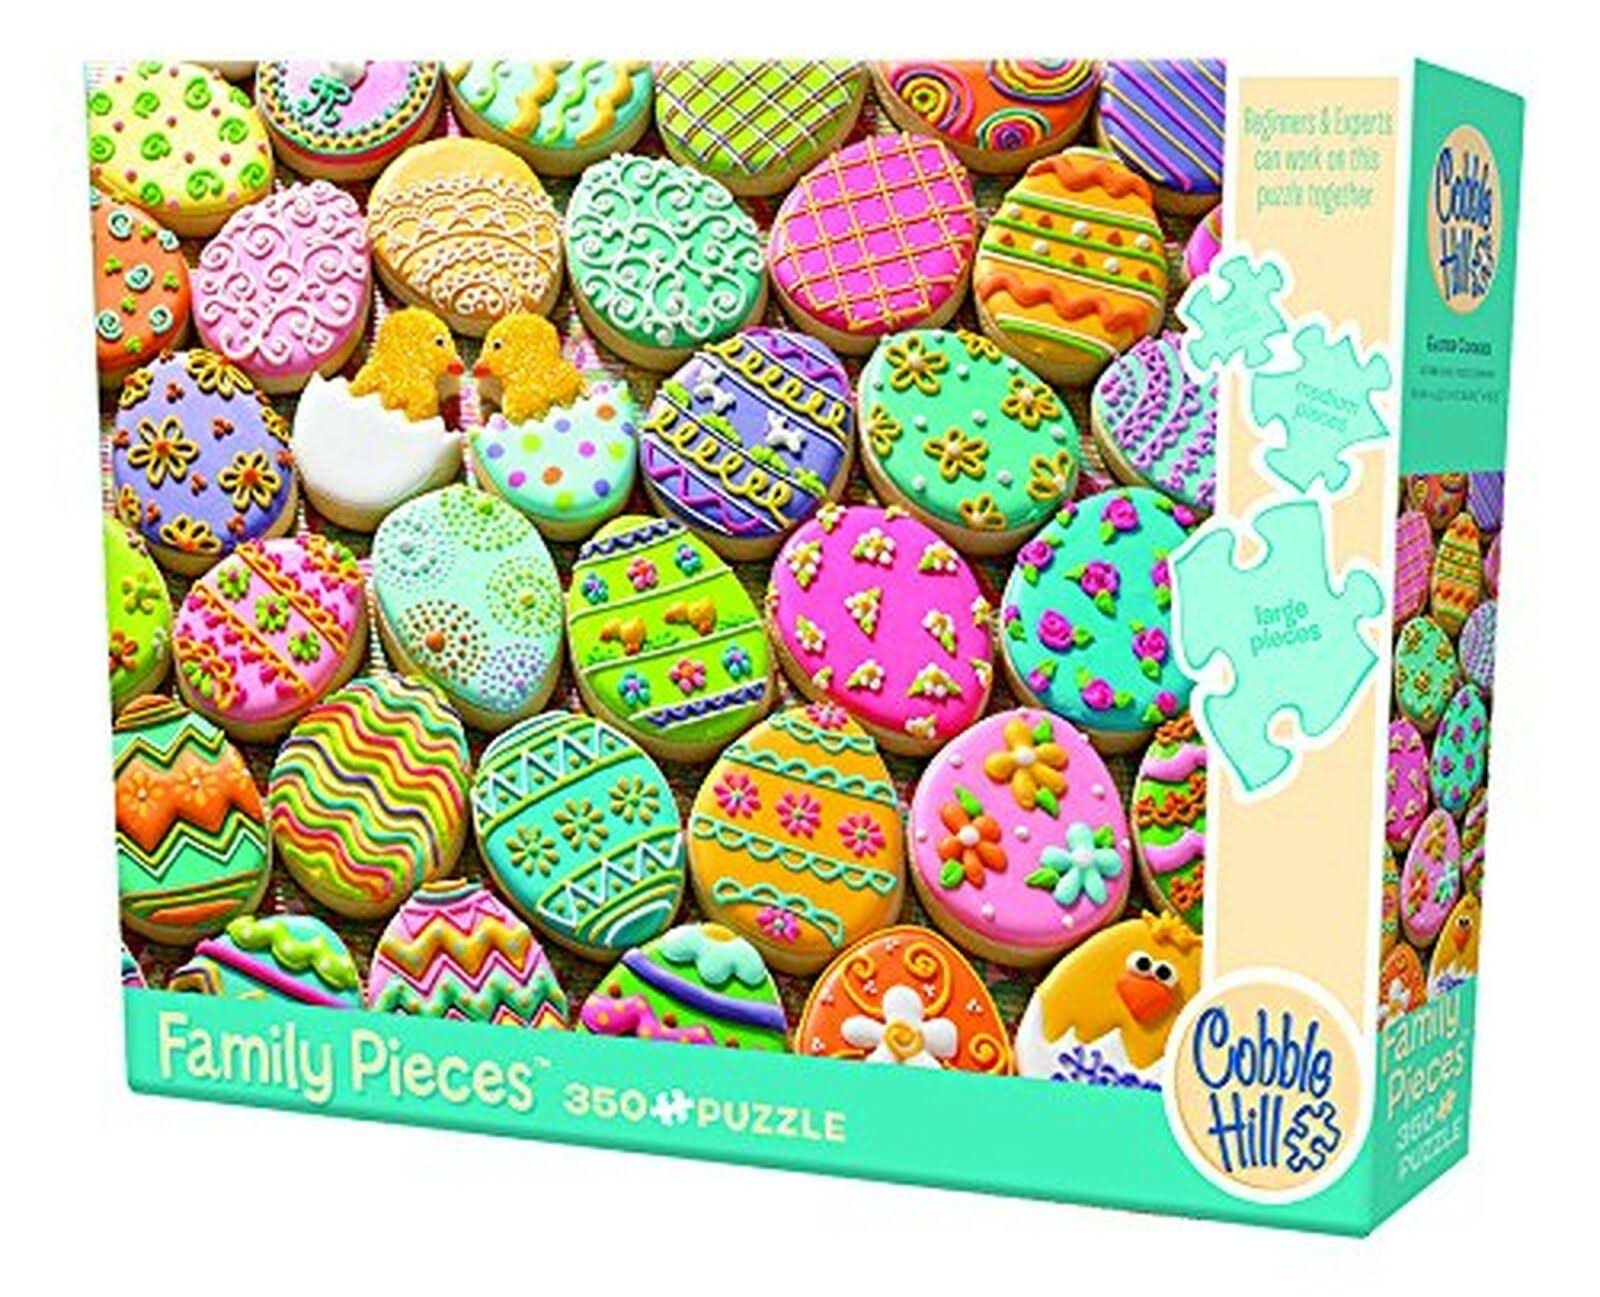 Cobble Hill Easter Cookies Jigsaw Puzzle